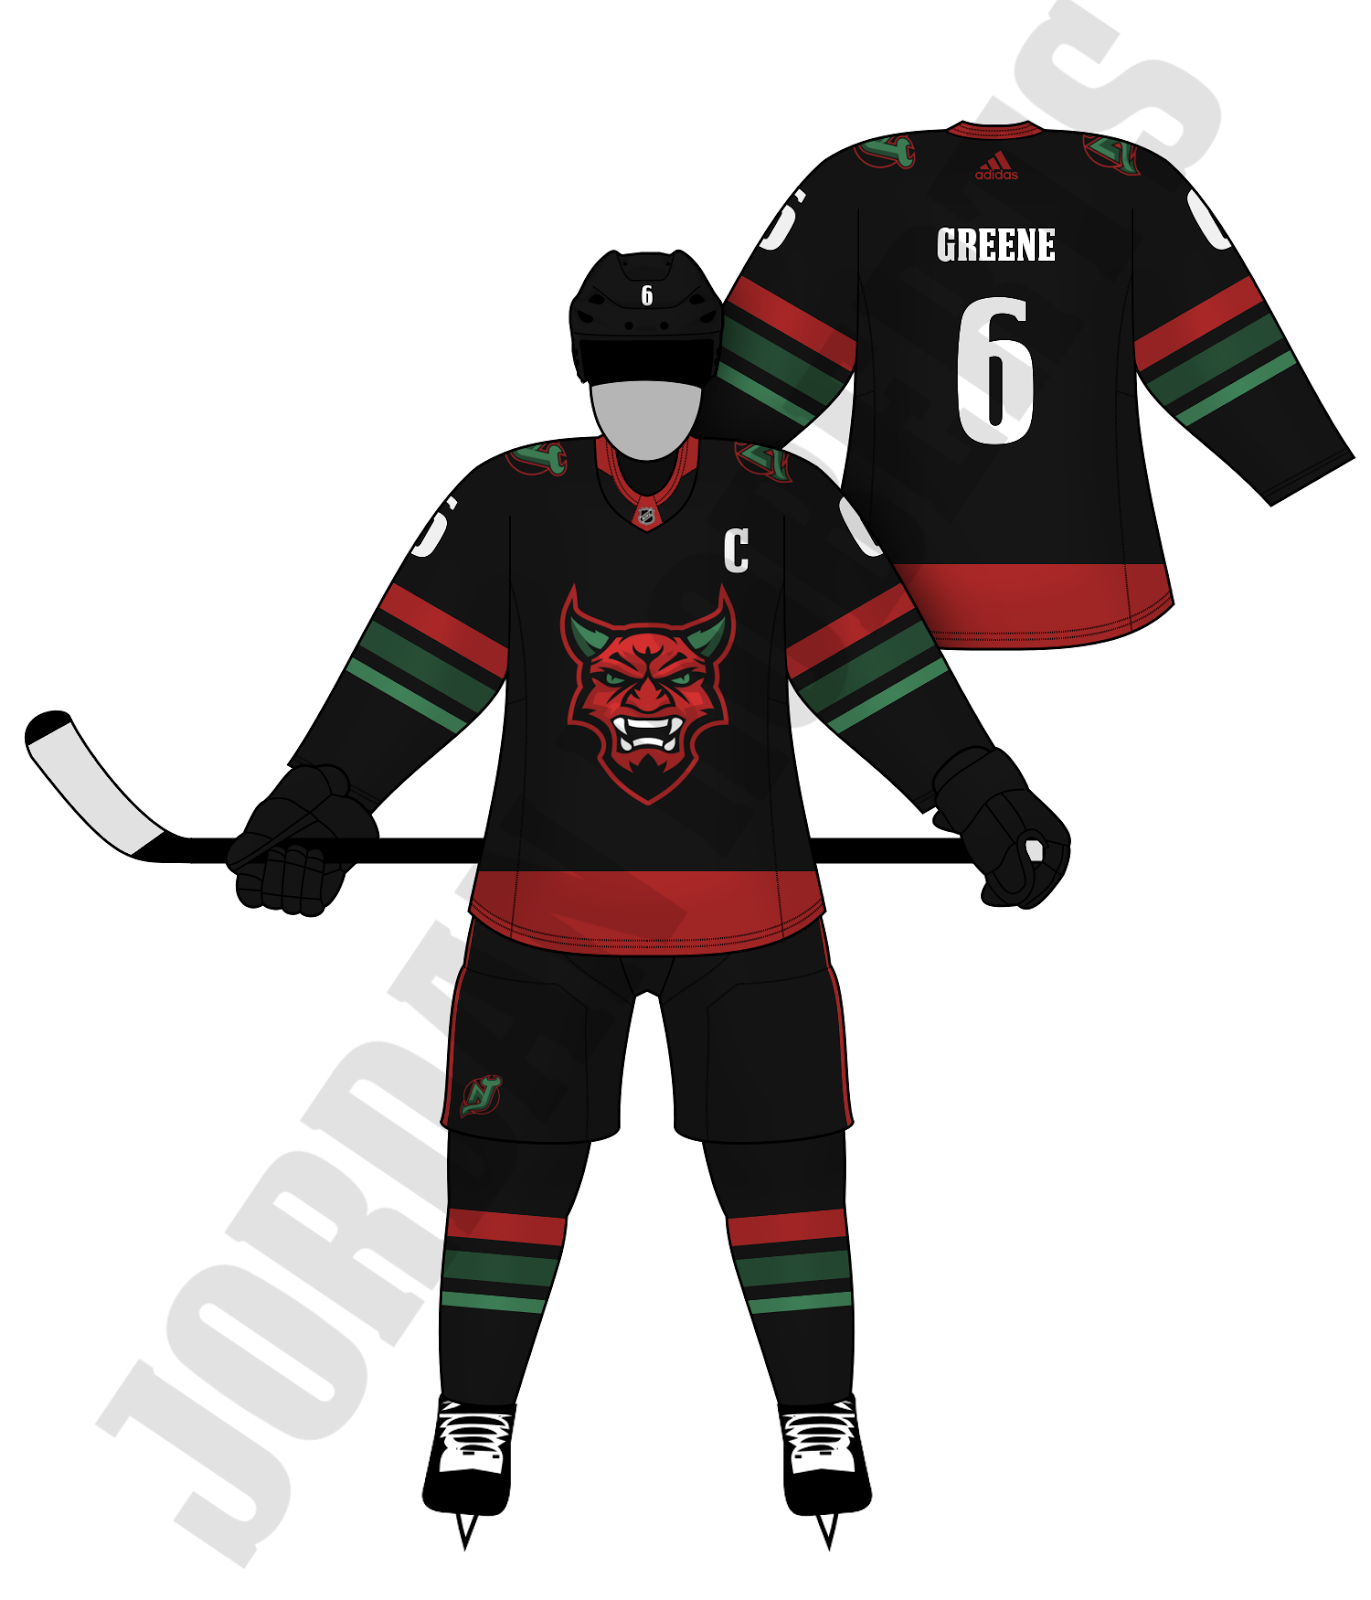 New Jersey Devils Disappoint With Unwhelming New Third Uniform –  SportsLogos.Net News